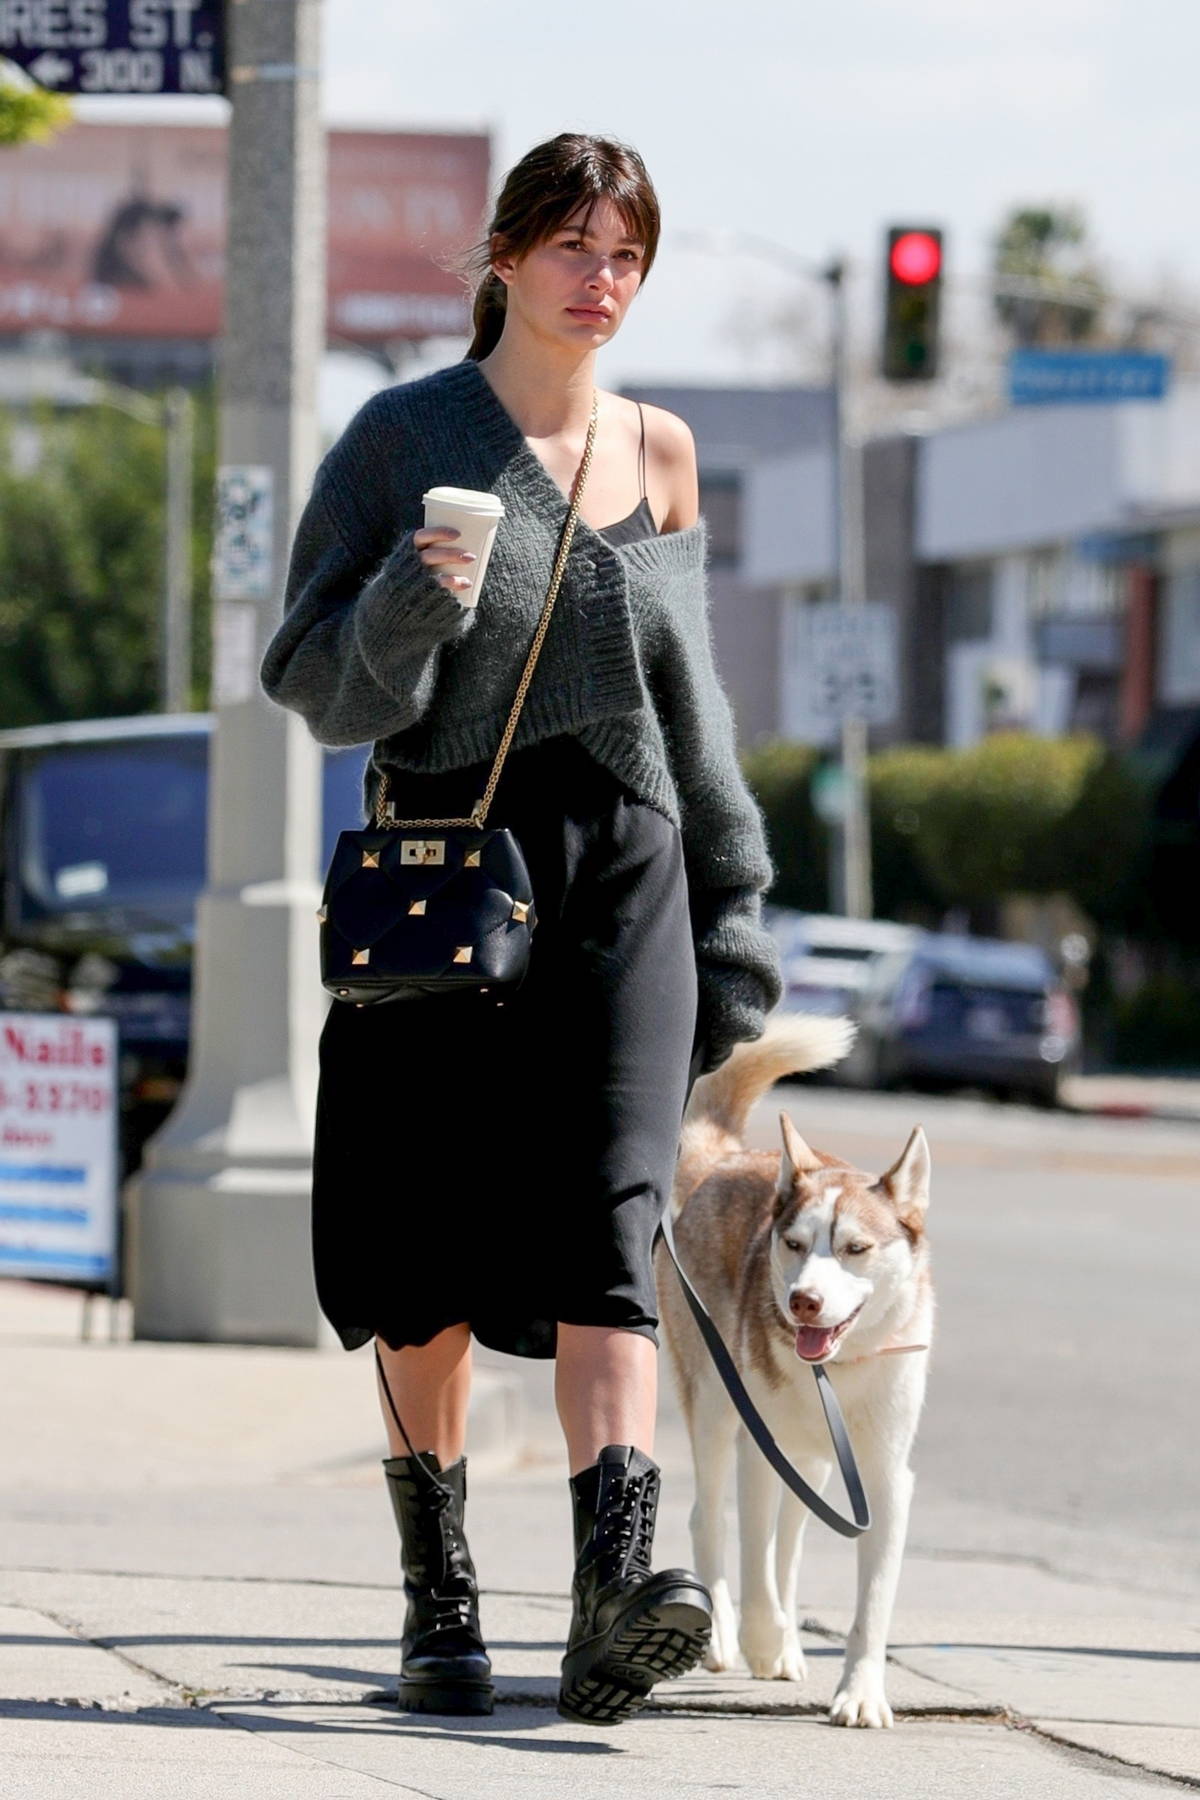 https://www.celebsfirst.com/wp-content/uploads/2021/03/camila-morrone-looks-stunning-in-a-black-dress-with-a-grey-sweater-while-out-for-coffee-with-her-dog-in-west-hollywood-california-090321_11.jpg